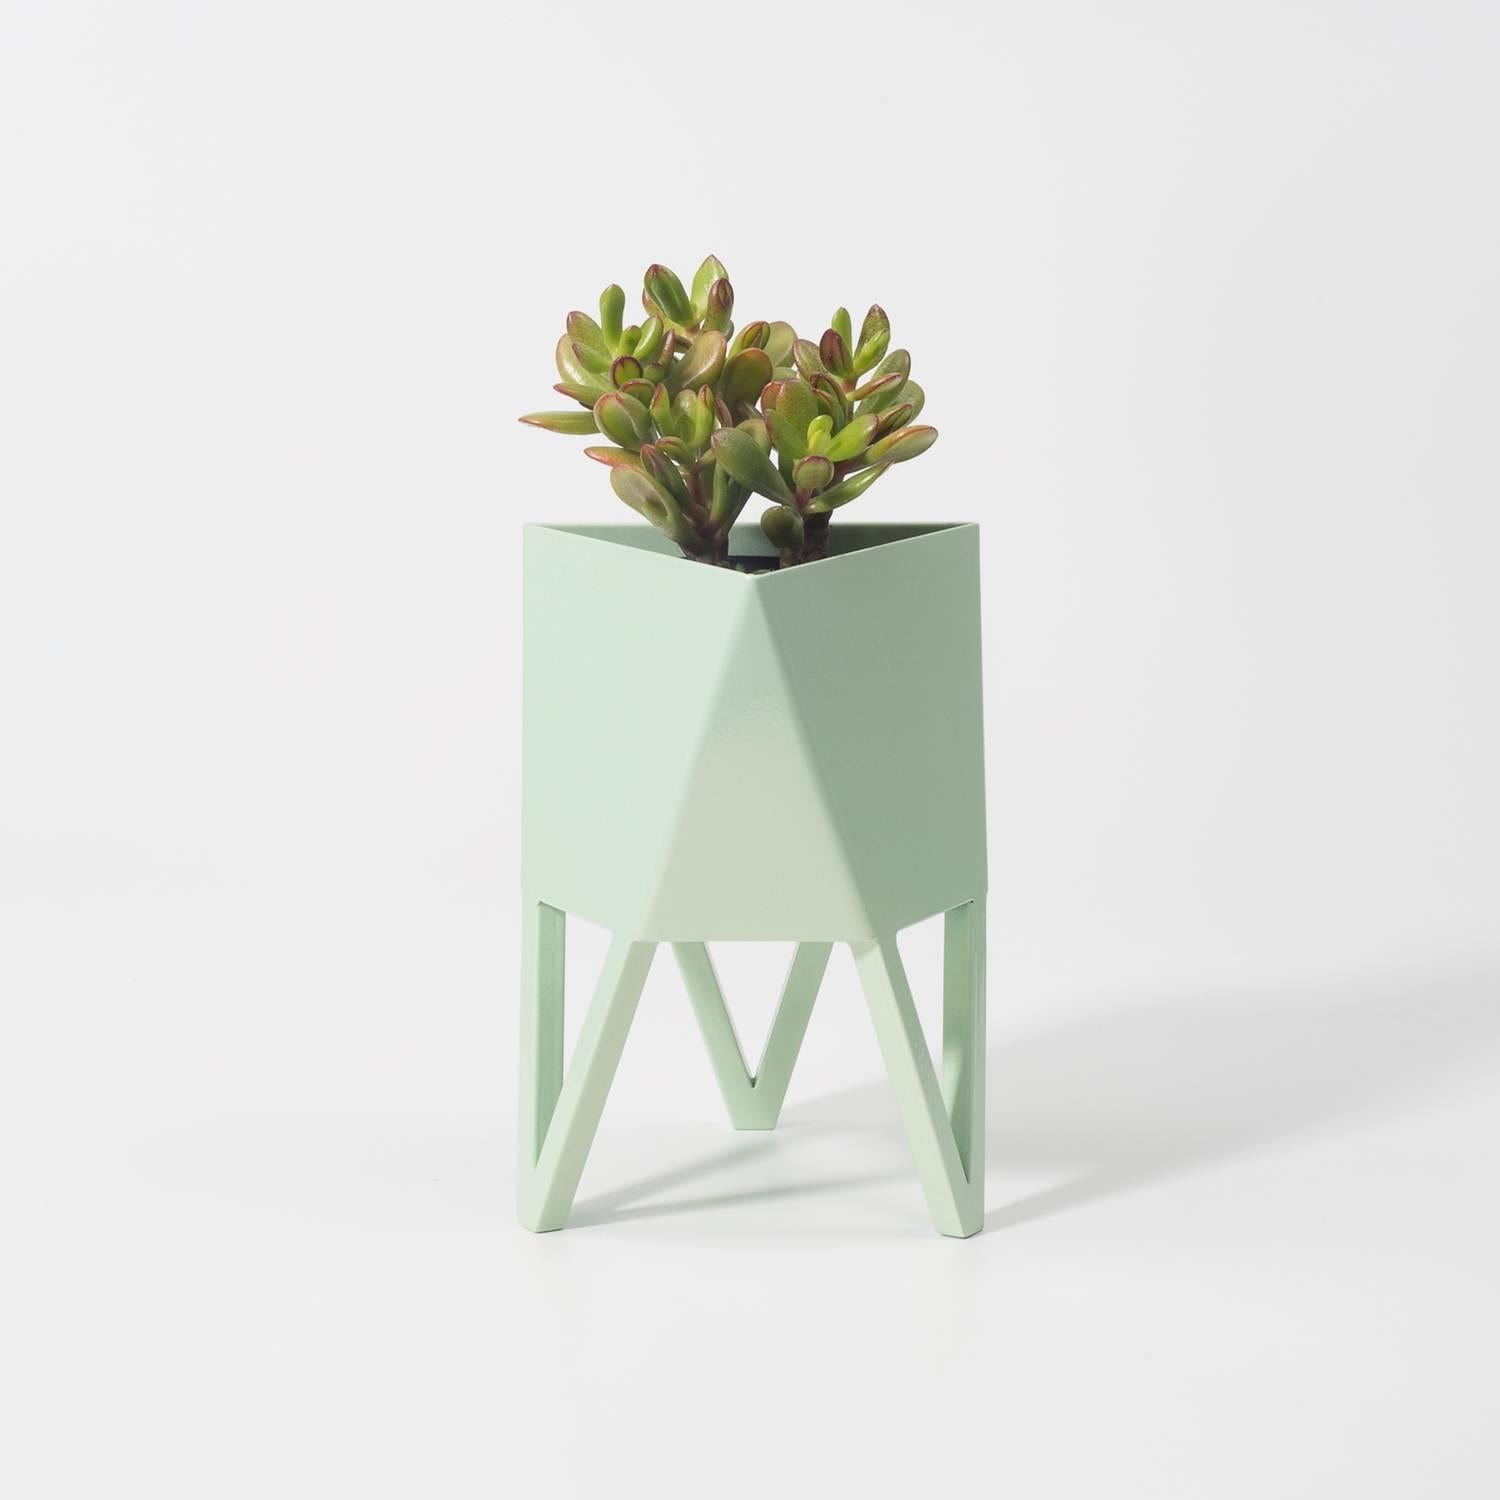 Deca Planter in Living Coral Steel, Mini, by Force/Collide 5